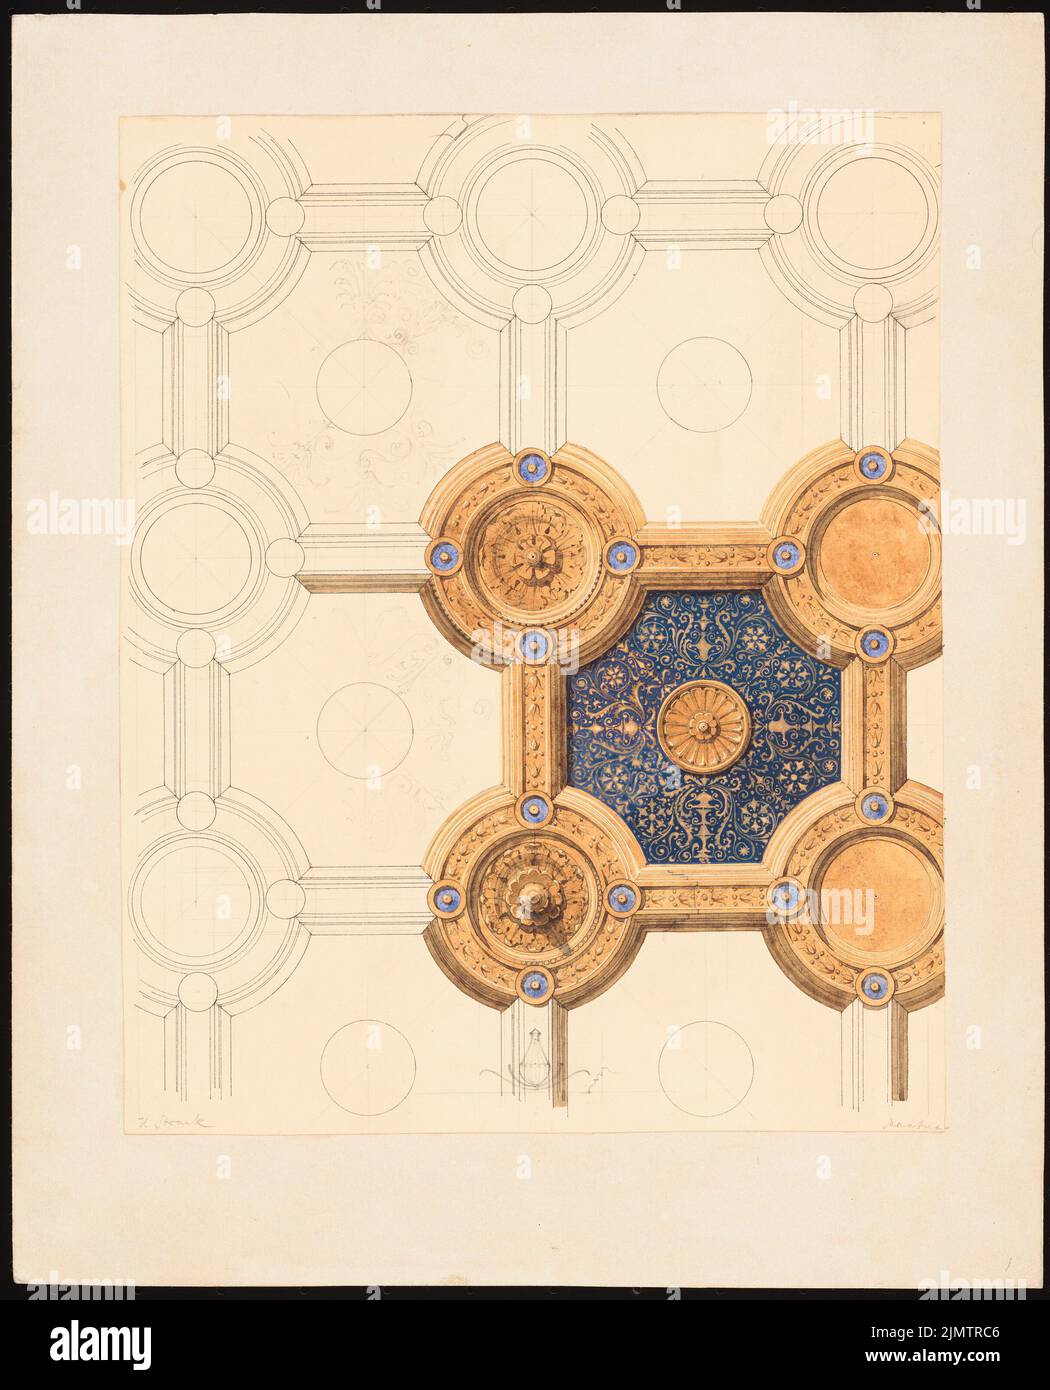 Strack Heinrich (1841-1912), ceiling fields in Mantua (without date): cover decoration. Ink, pencil watercolor, white -raised on cardboard, 37.7 x 30.5 cm (including scan edges) Strack Heinrich  (1841-1912): Deckenfelder, Mantua Stock Photo